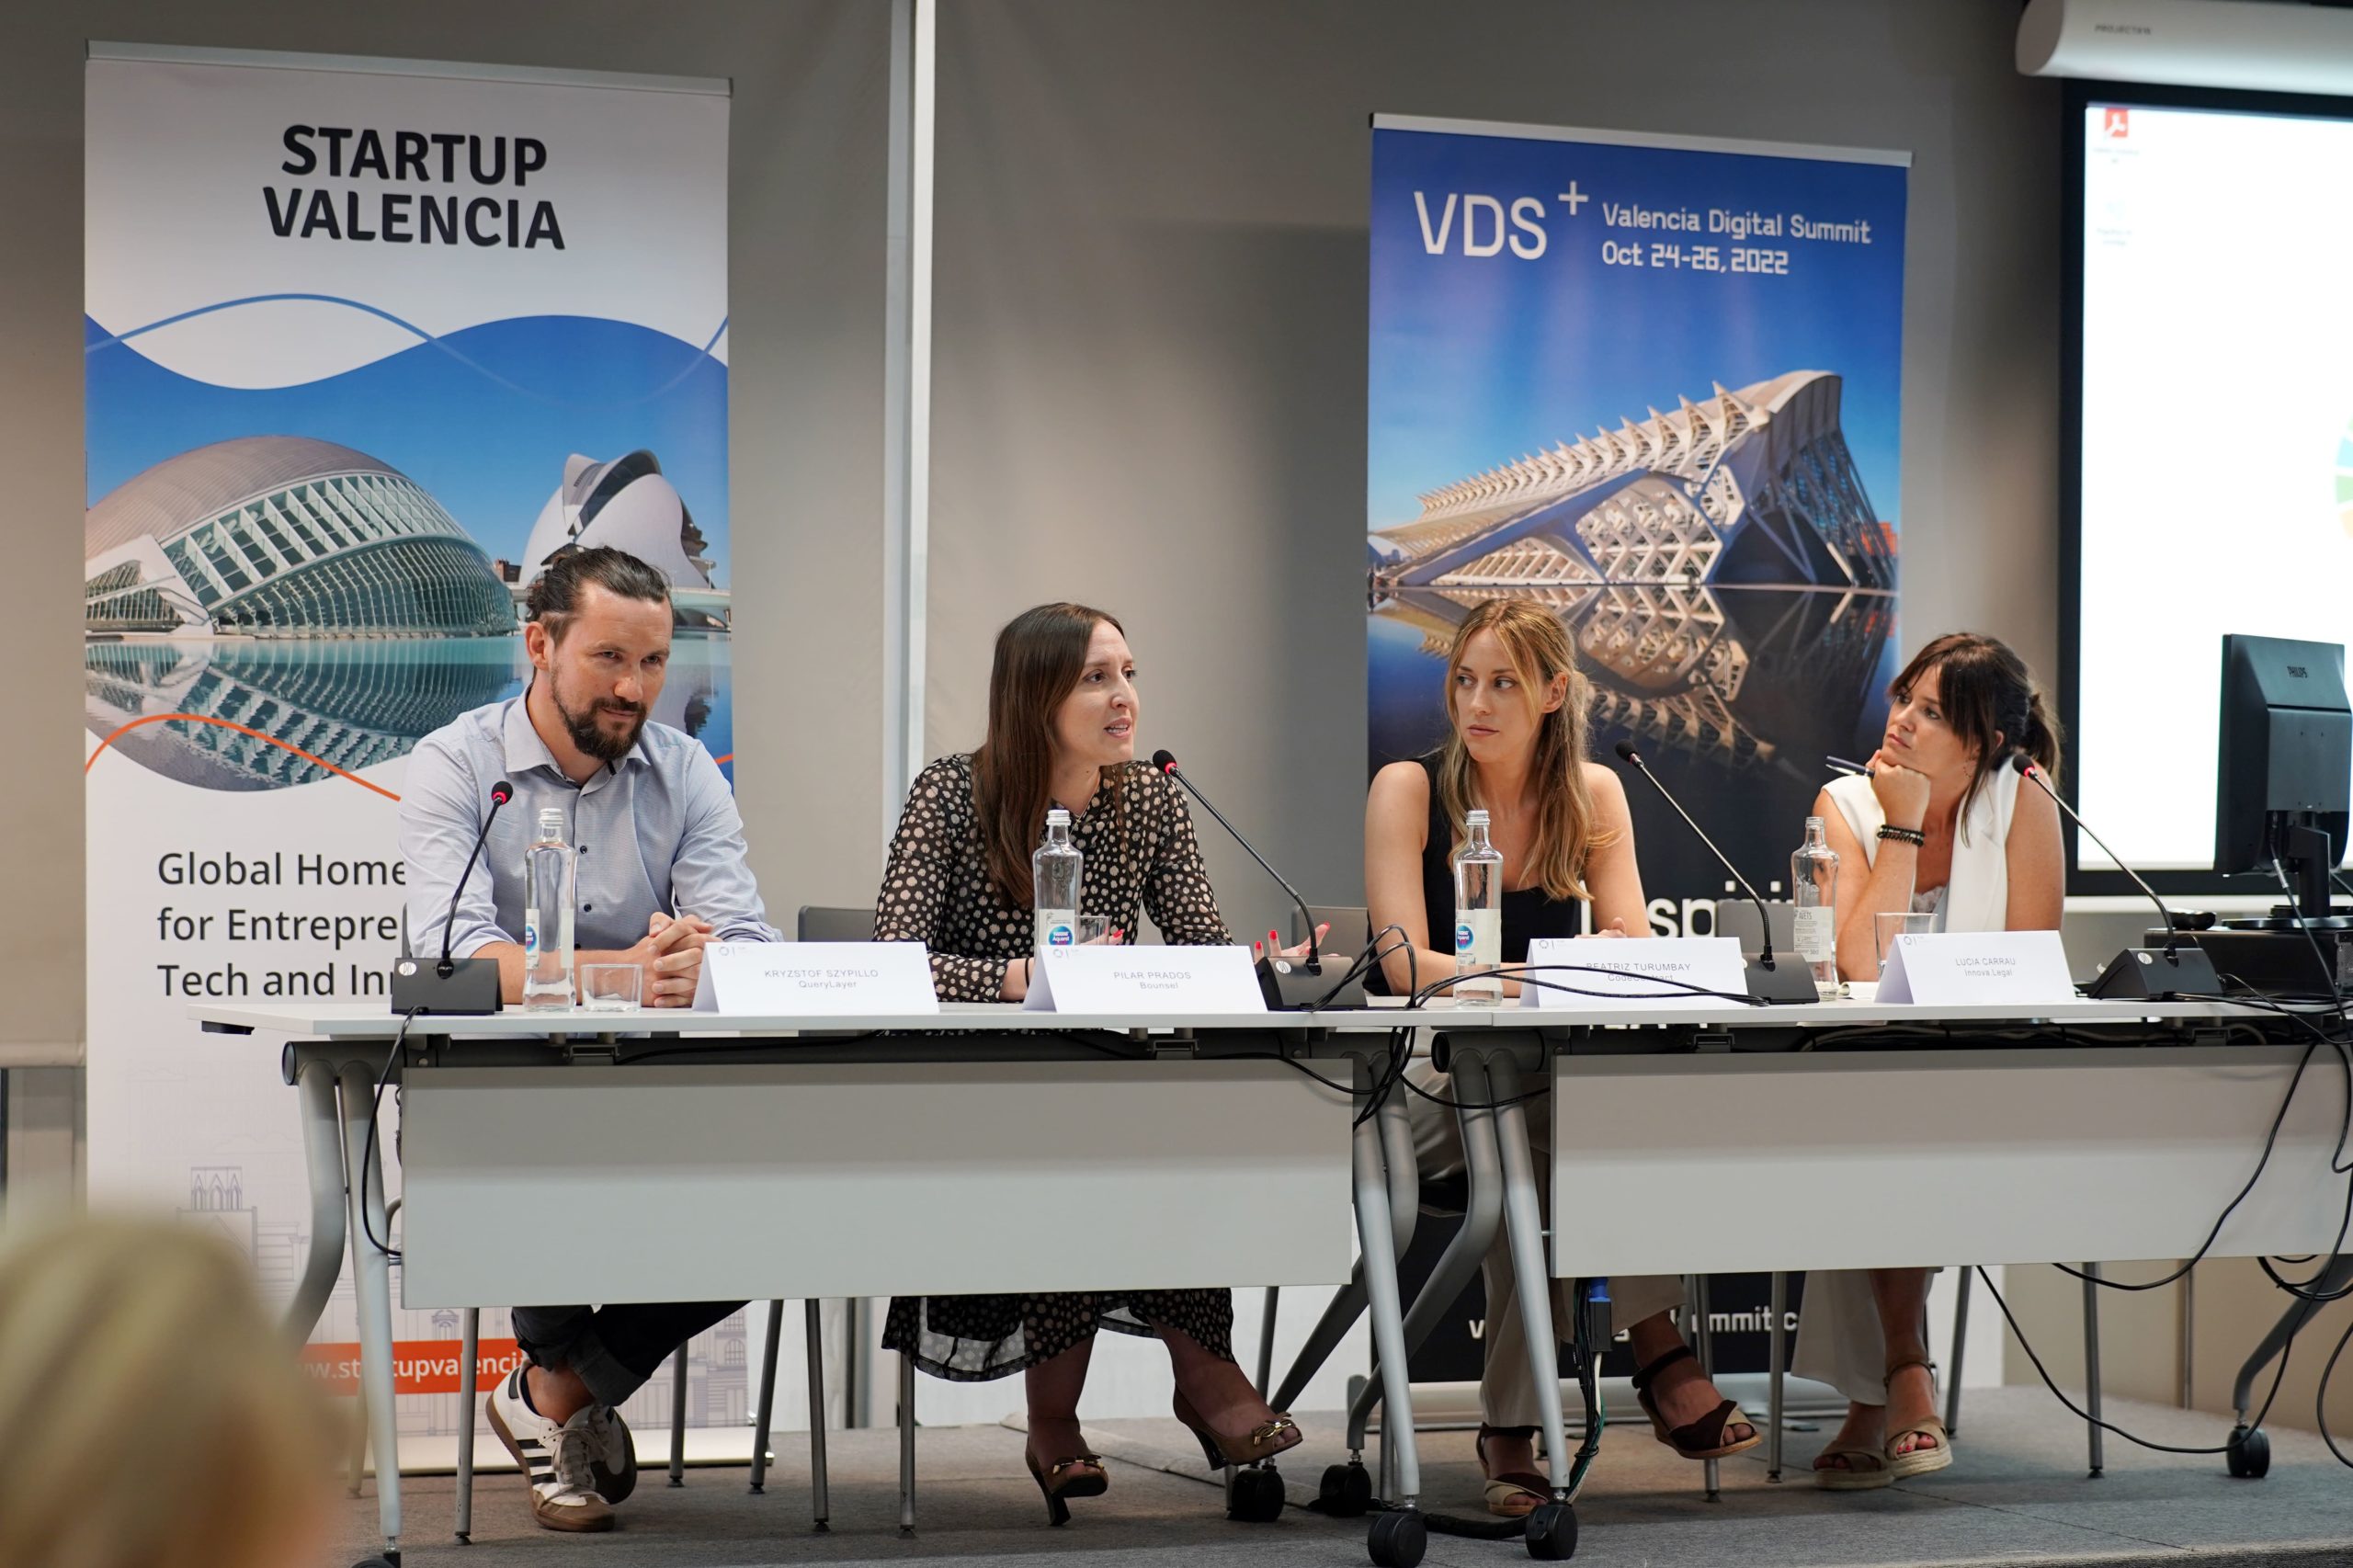 Startup Valencia brings legal technology